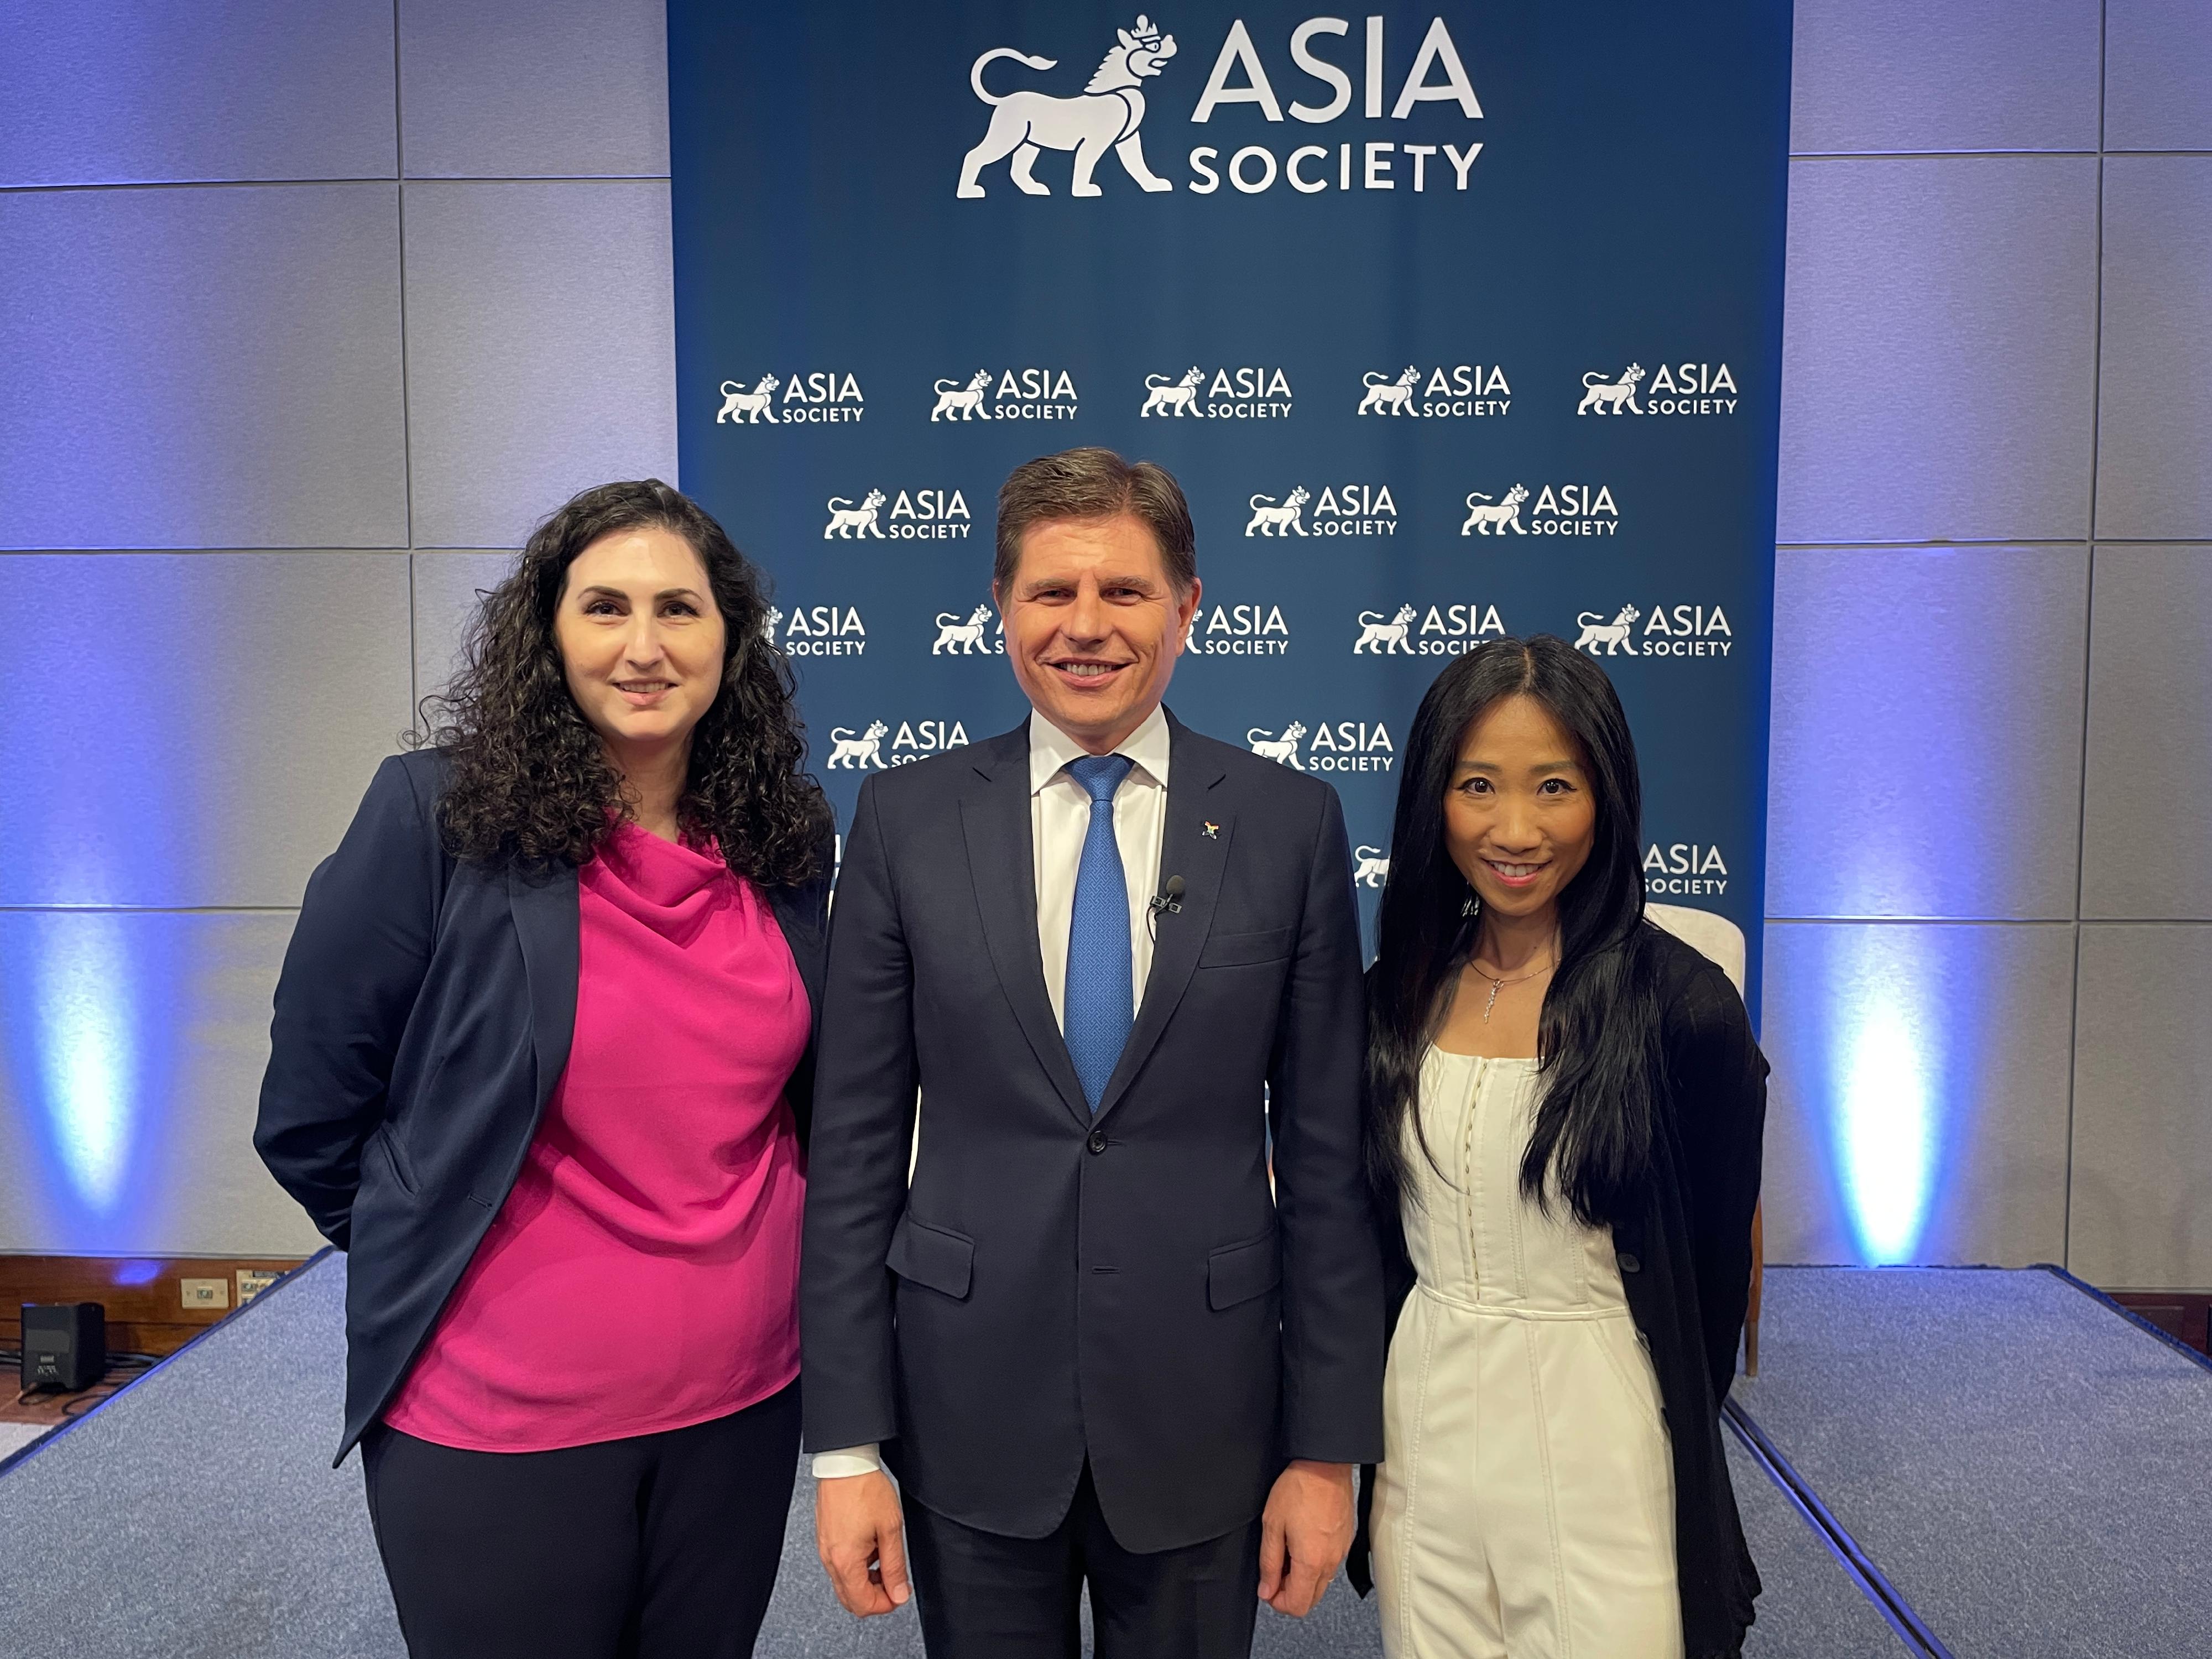 Photo shows the Director of the Hong Kong Economic and Trade Office in New York, Ms Candy Nip (right) with the Executive Director and Chief Executive Officer of the Hong Kong Exchanges and Clearing Limited, Mr Nicolas Aguzin (centre) and the Chief Operating Officer of the Asia Society, Ms Debra Eisenman (left).